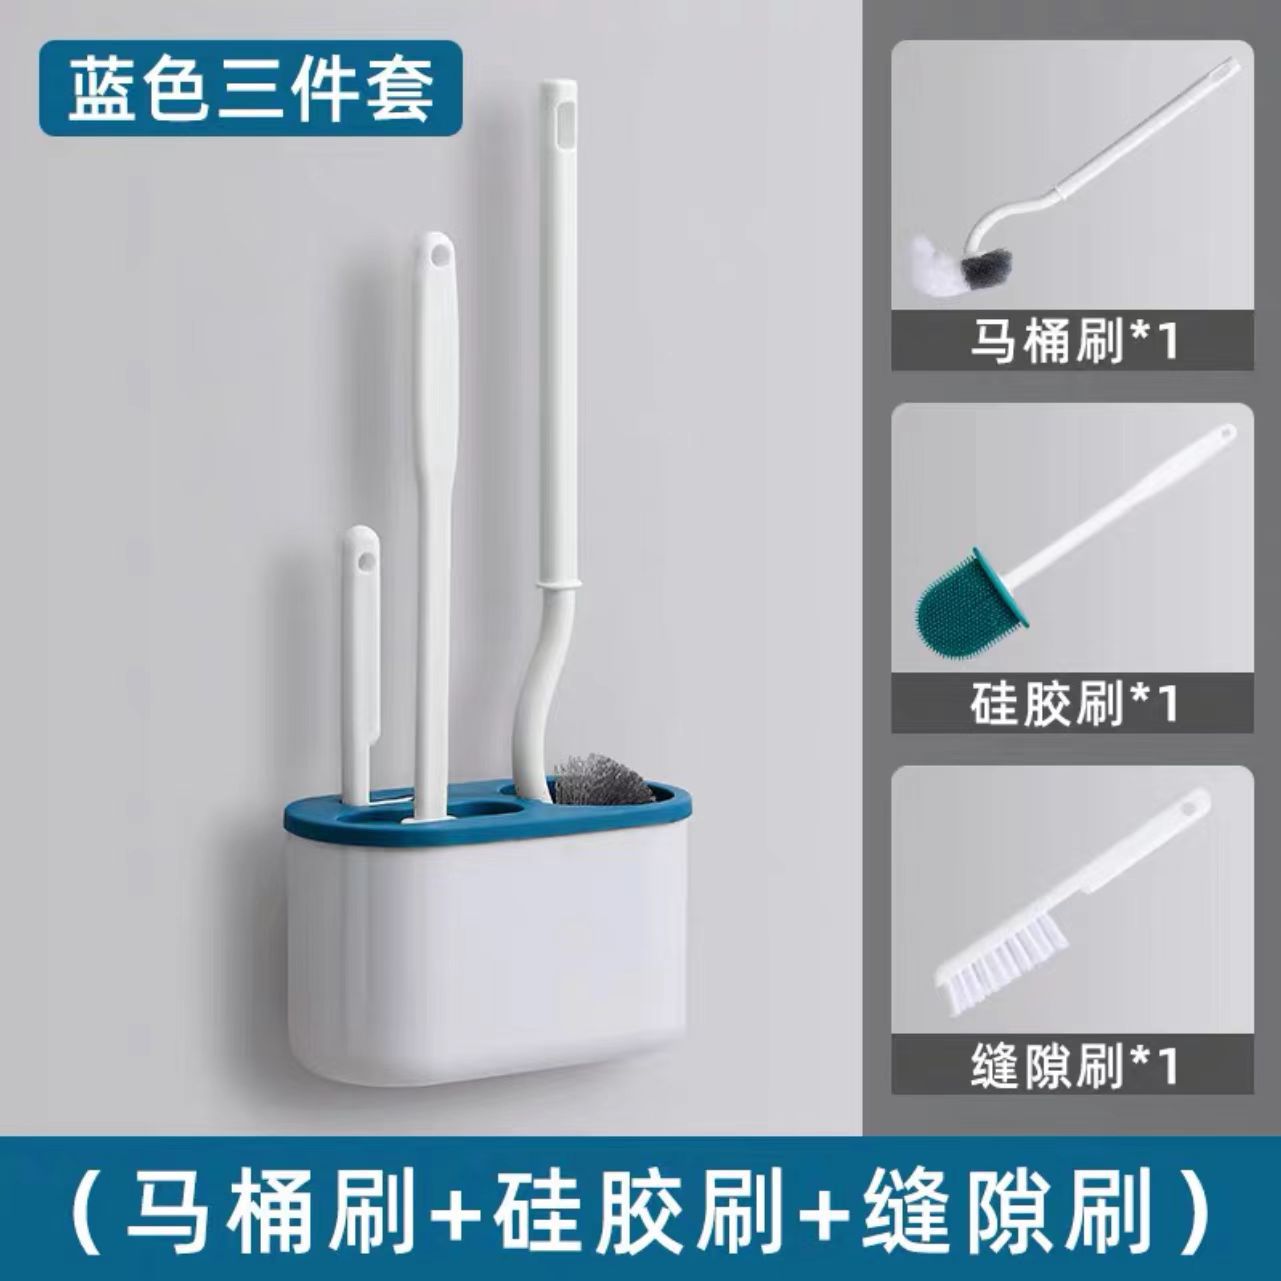 Japanese Style Wall Hanging Toilet Brush Set Bathroom Dead-Zone Free Toilet Brush Long Handle Soft Bristles Cleaning Brush Household Daily Necessities